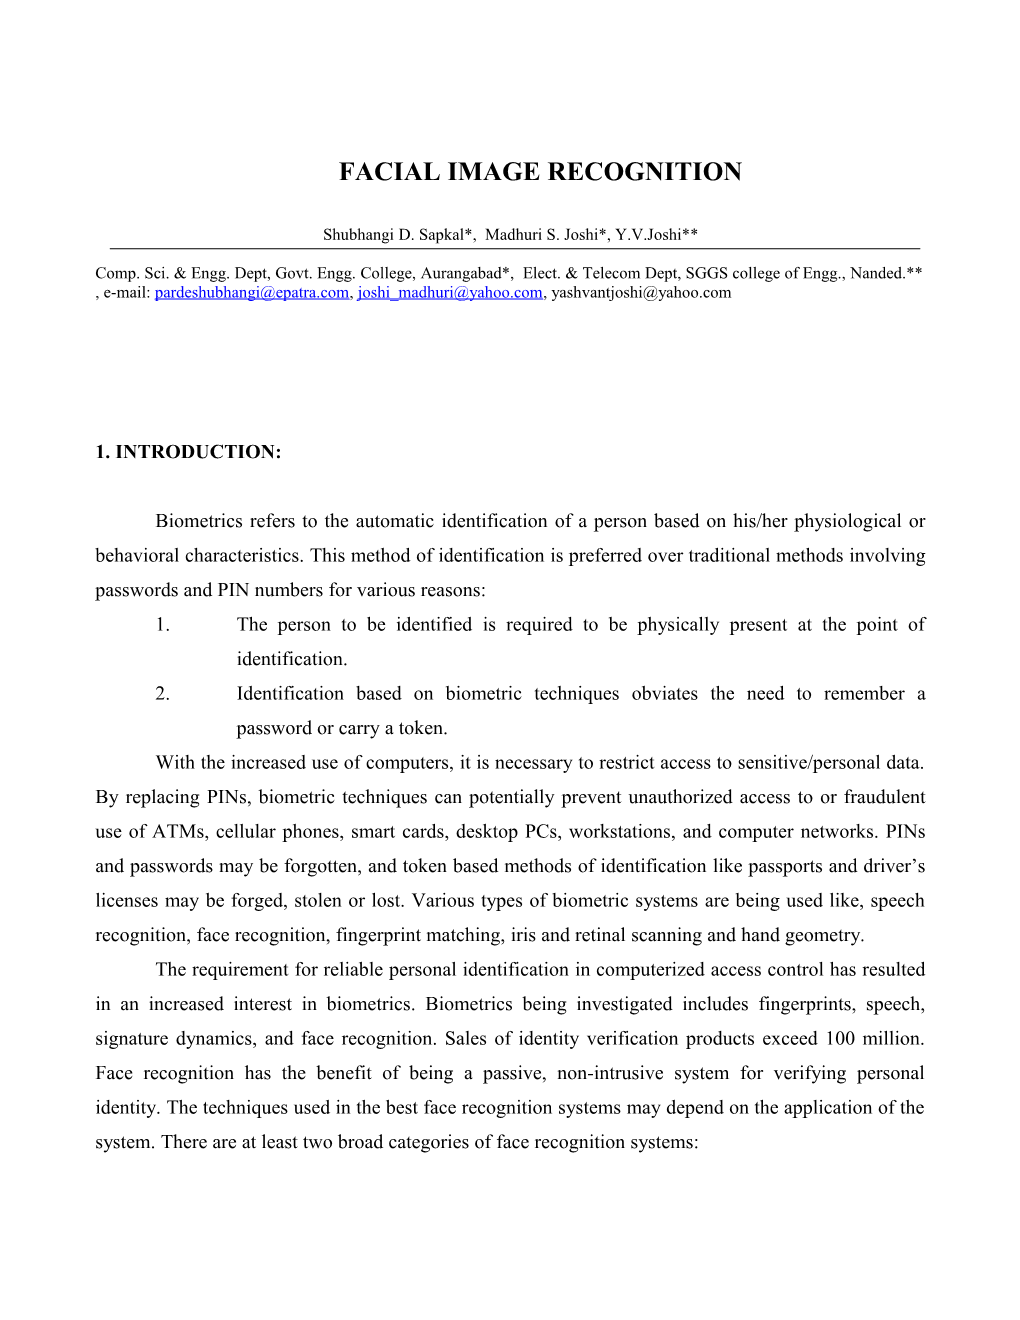 Facial Image Recognition